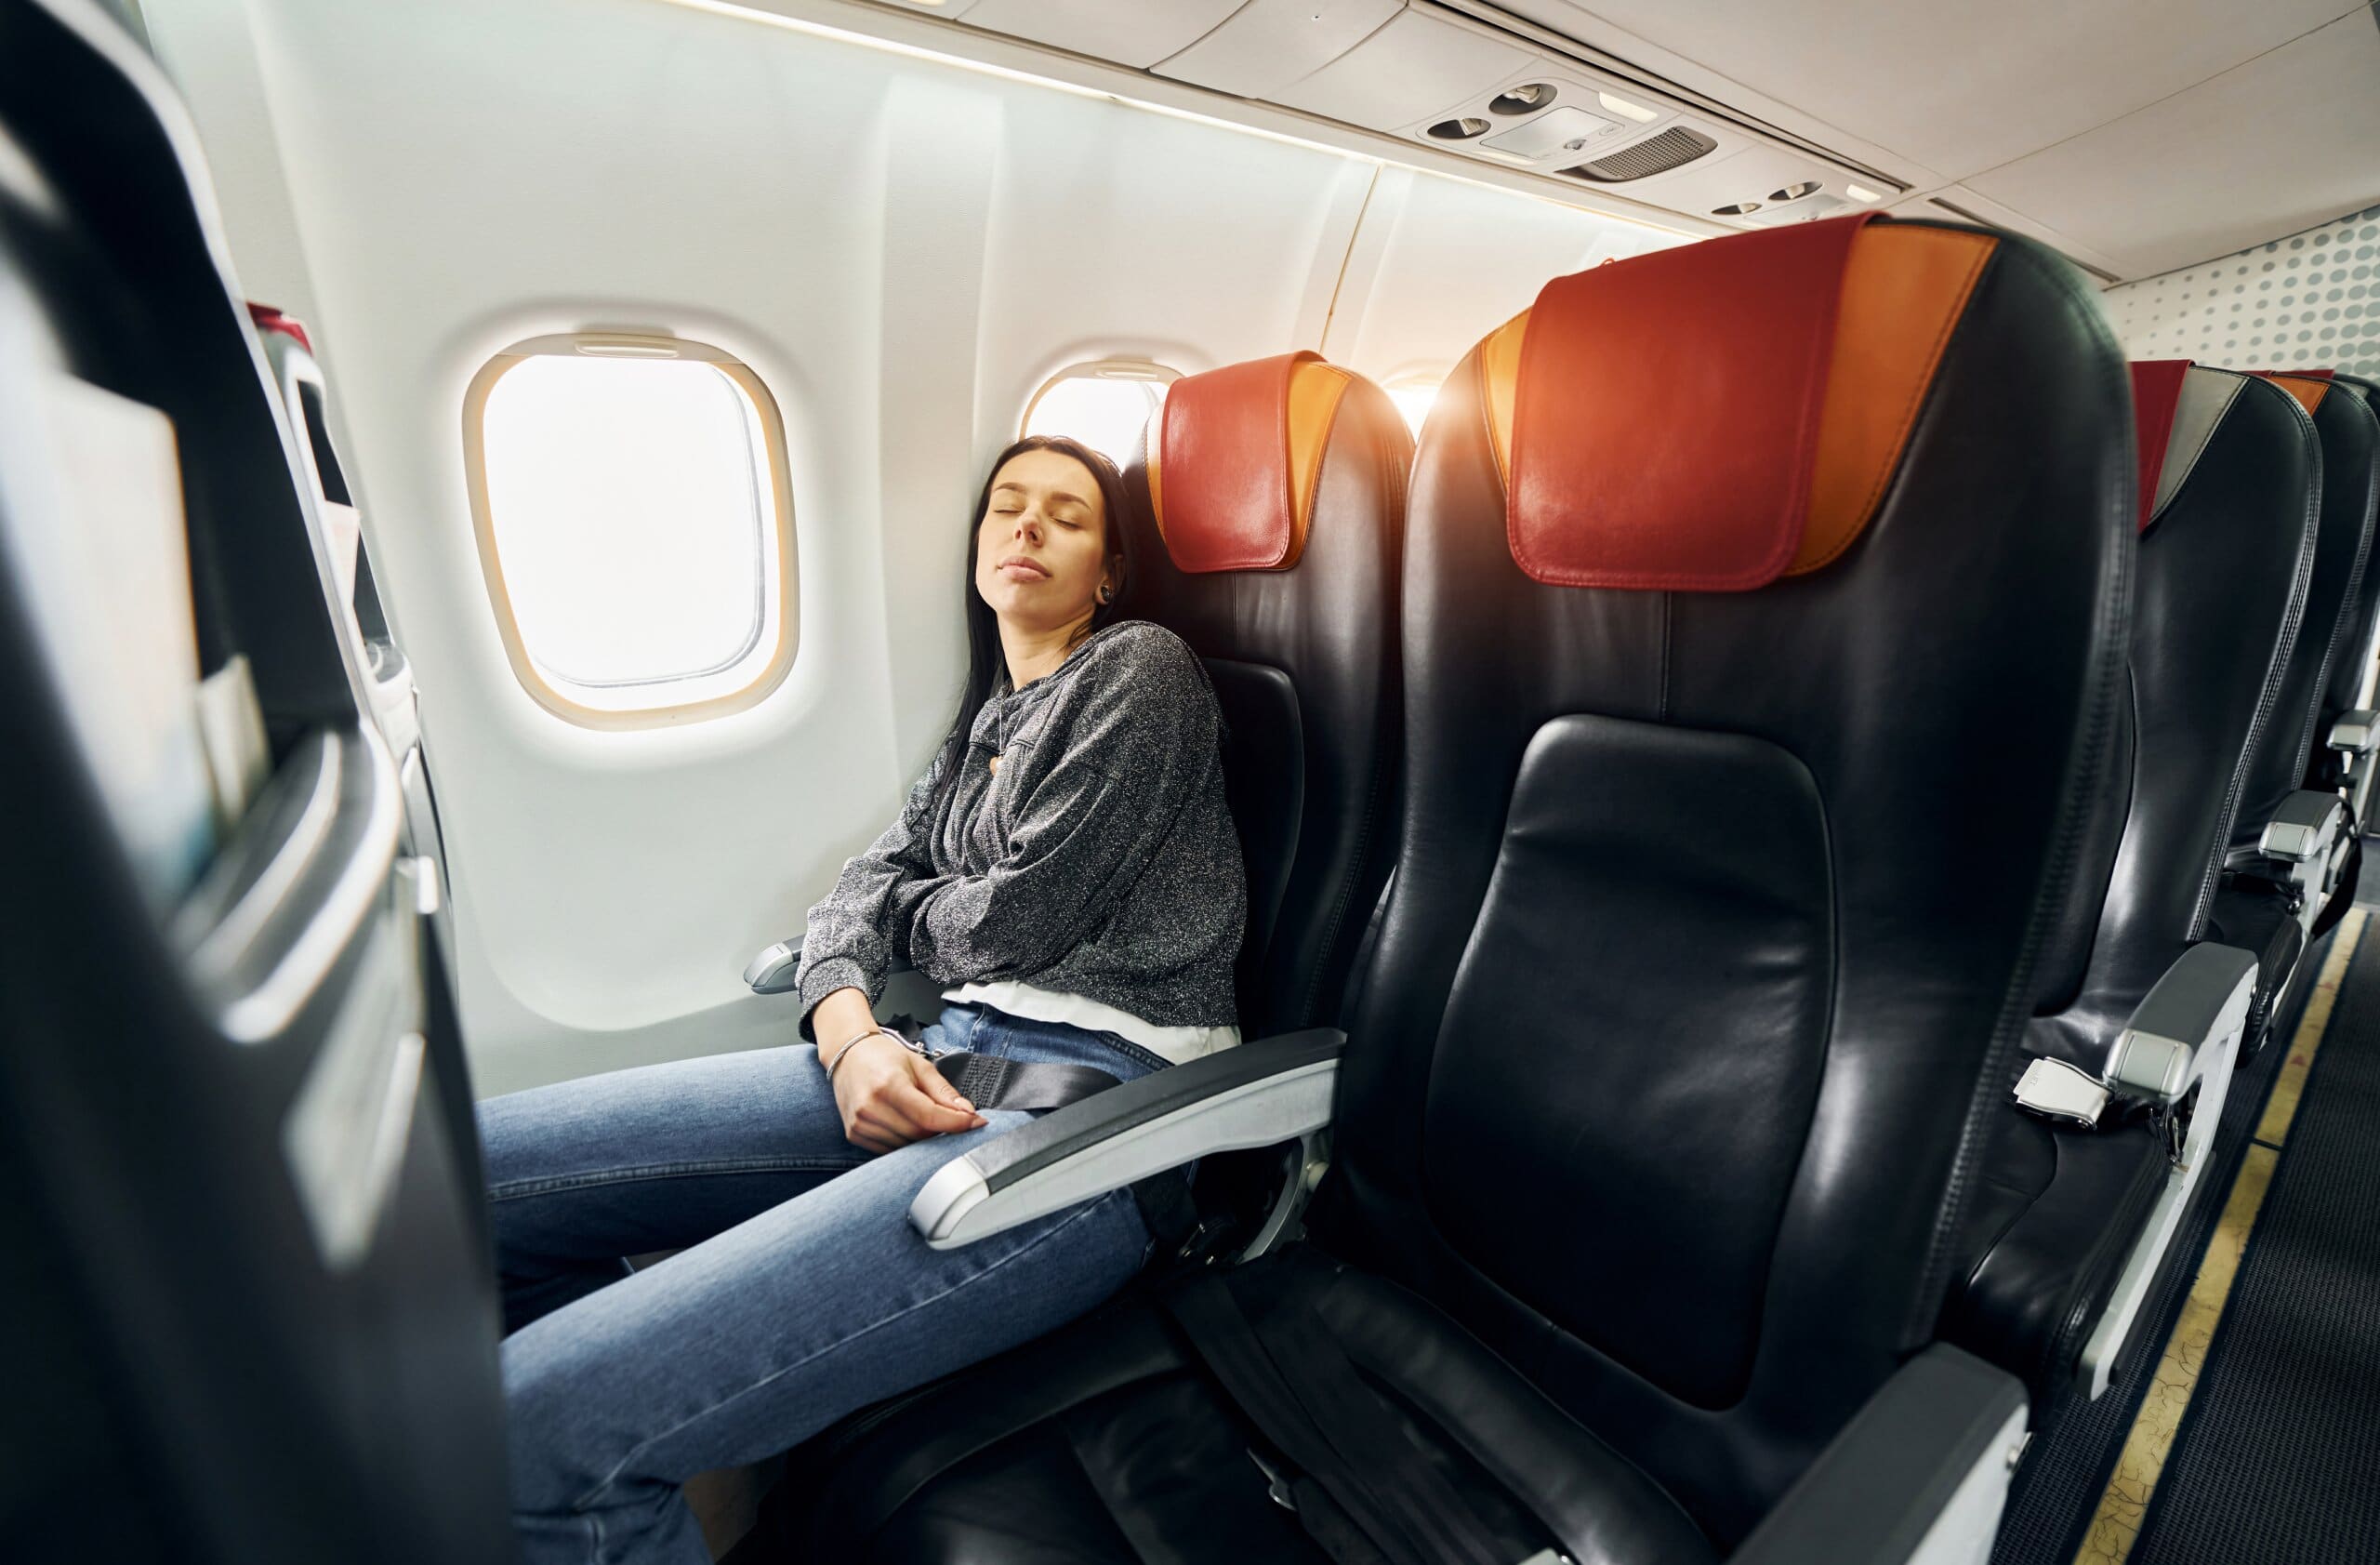 Woman sleeping in window seat on a plane with empty seats beside her.